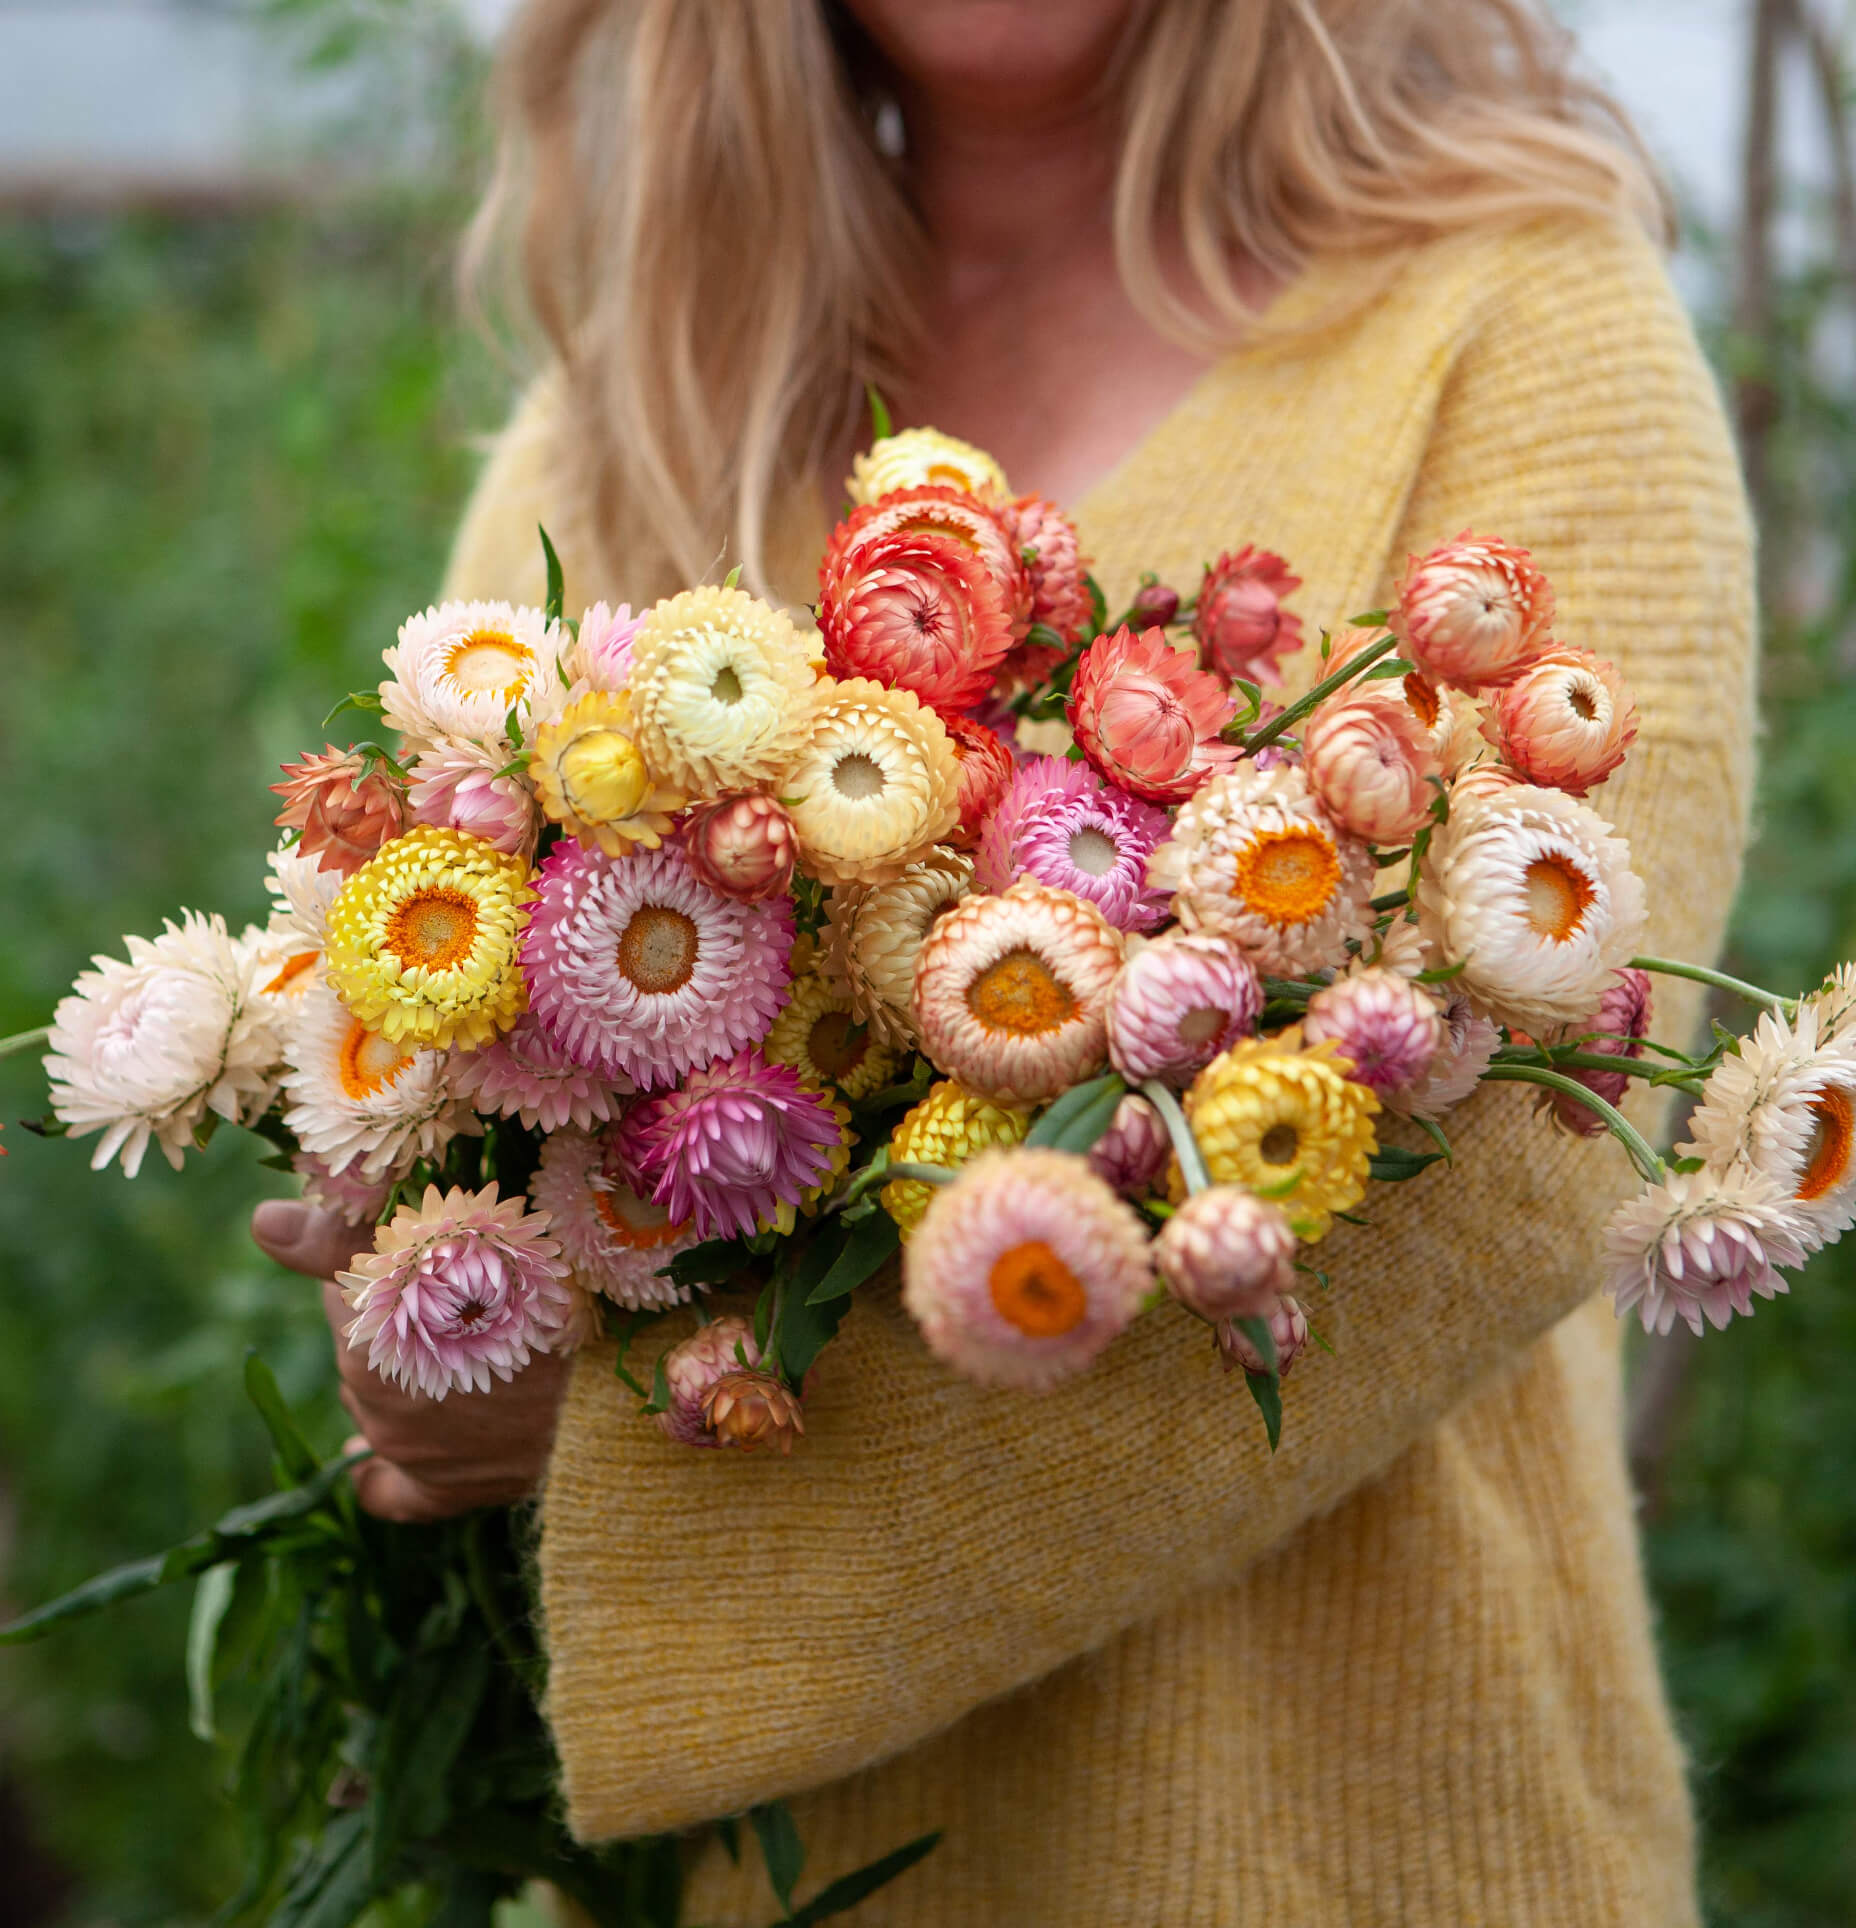 Sustainable interior everlasting floral sculpture designer Layla Robinson collecting flowers for drying